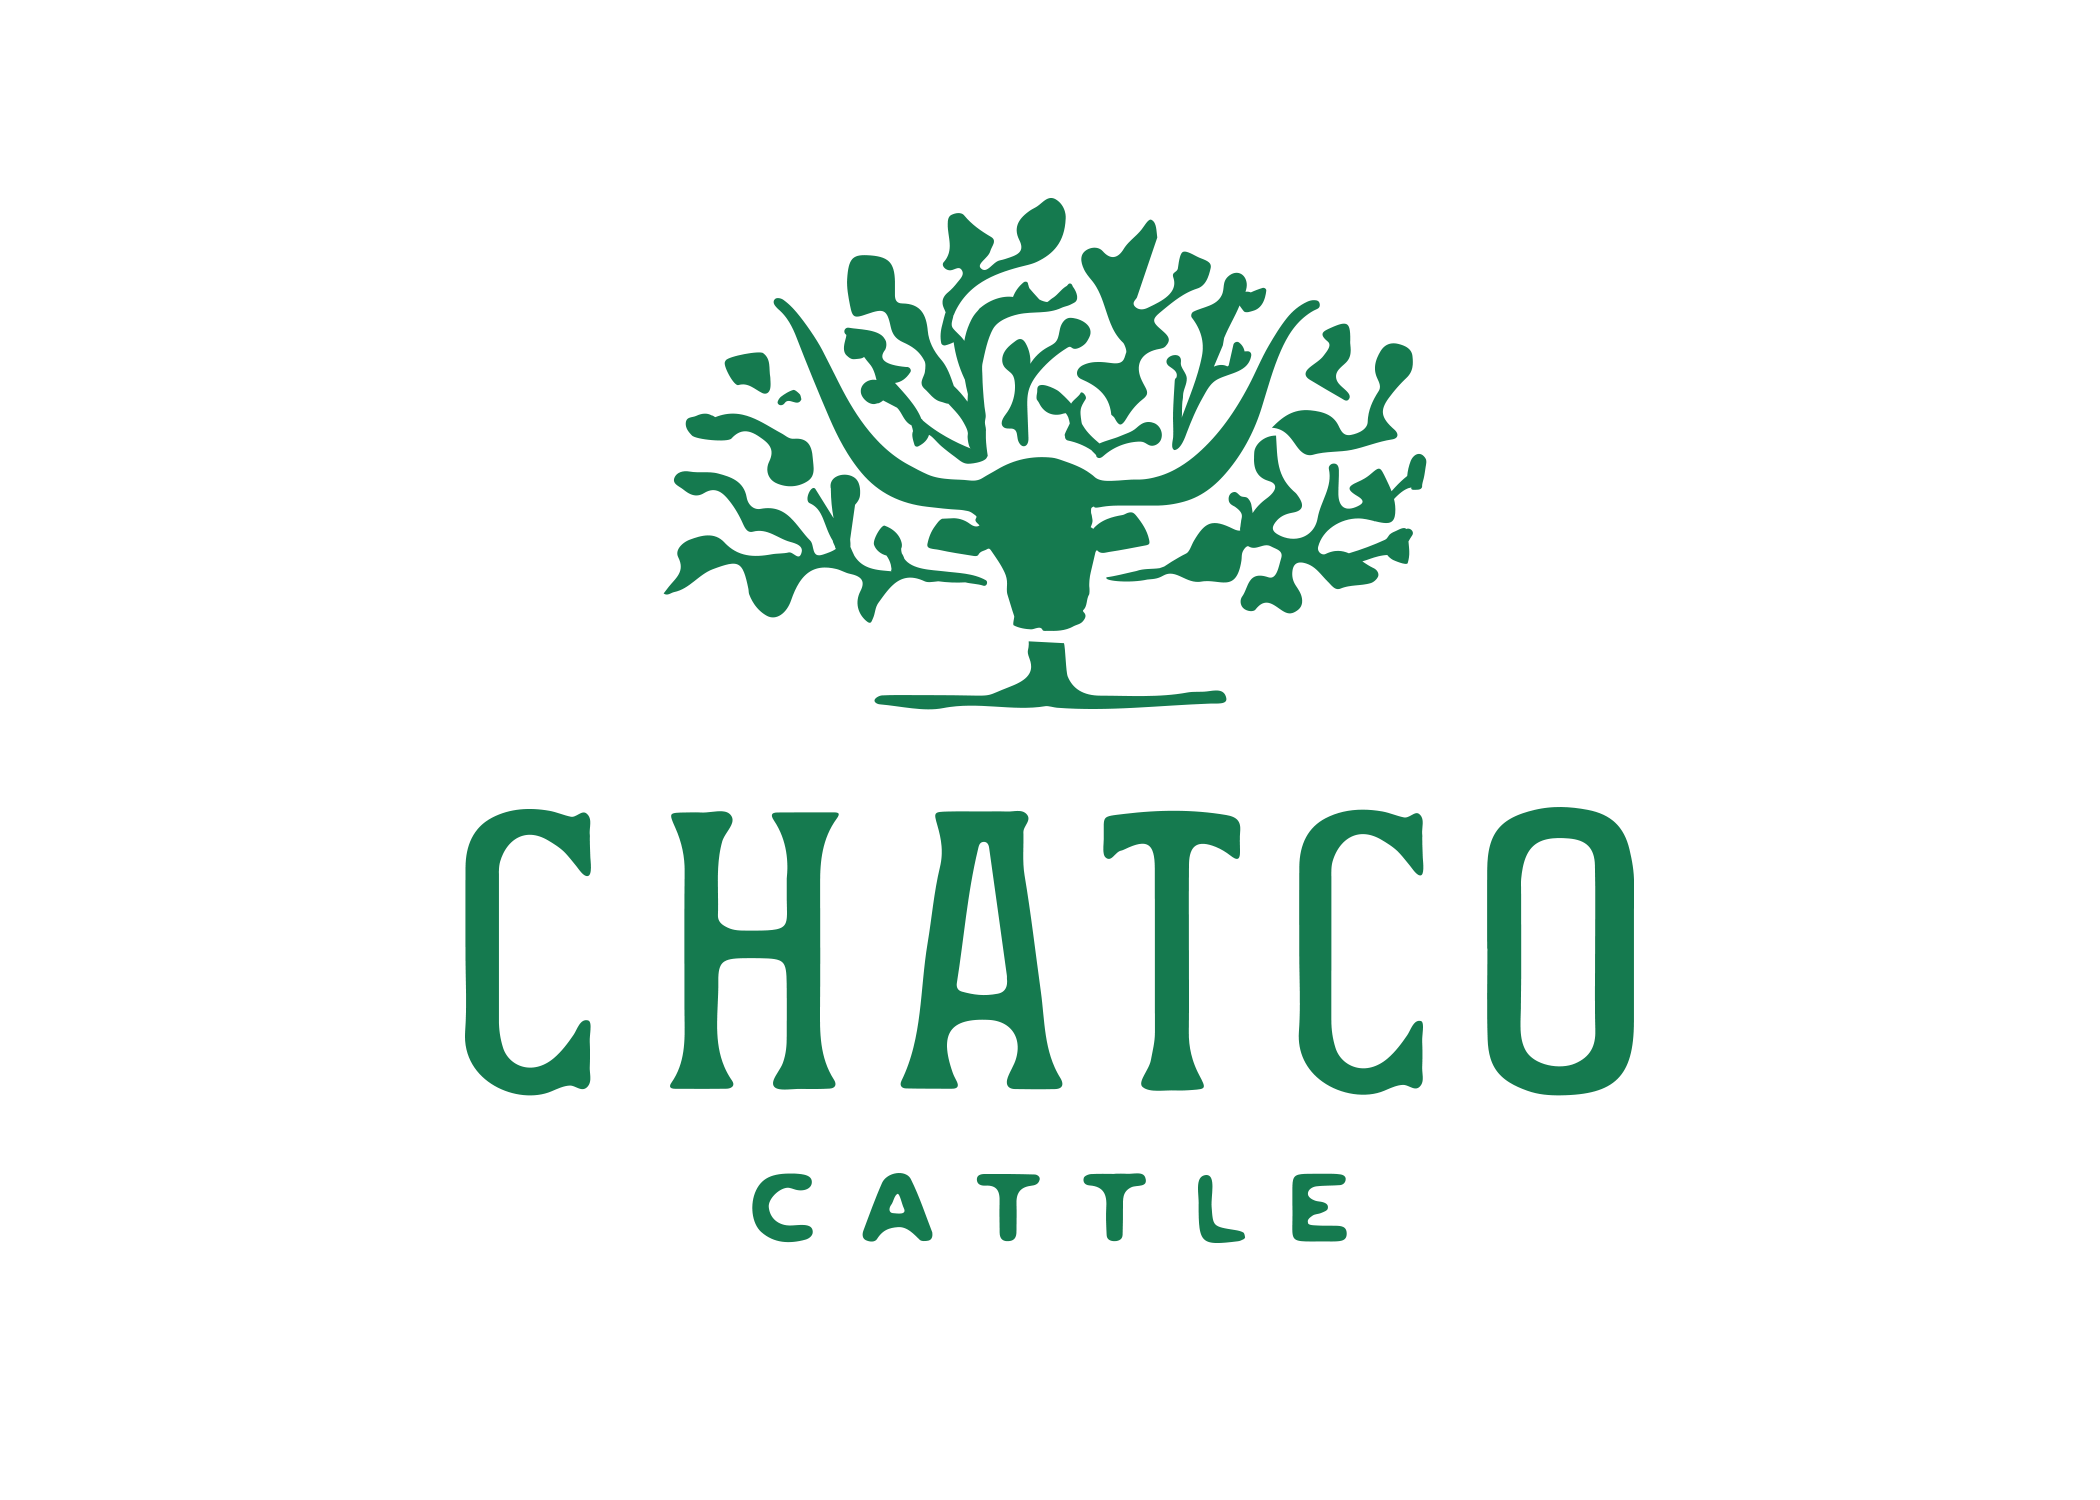 Design by Good South / ChatCo Cattle Logo Design